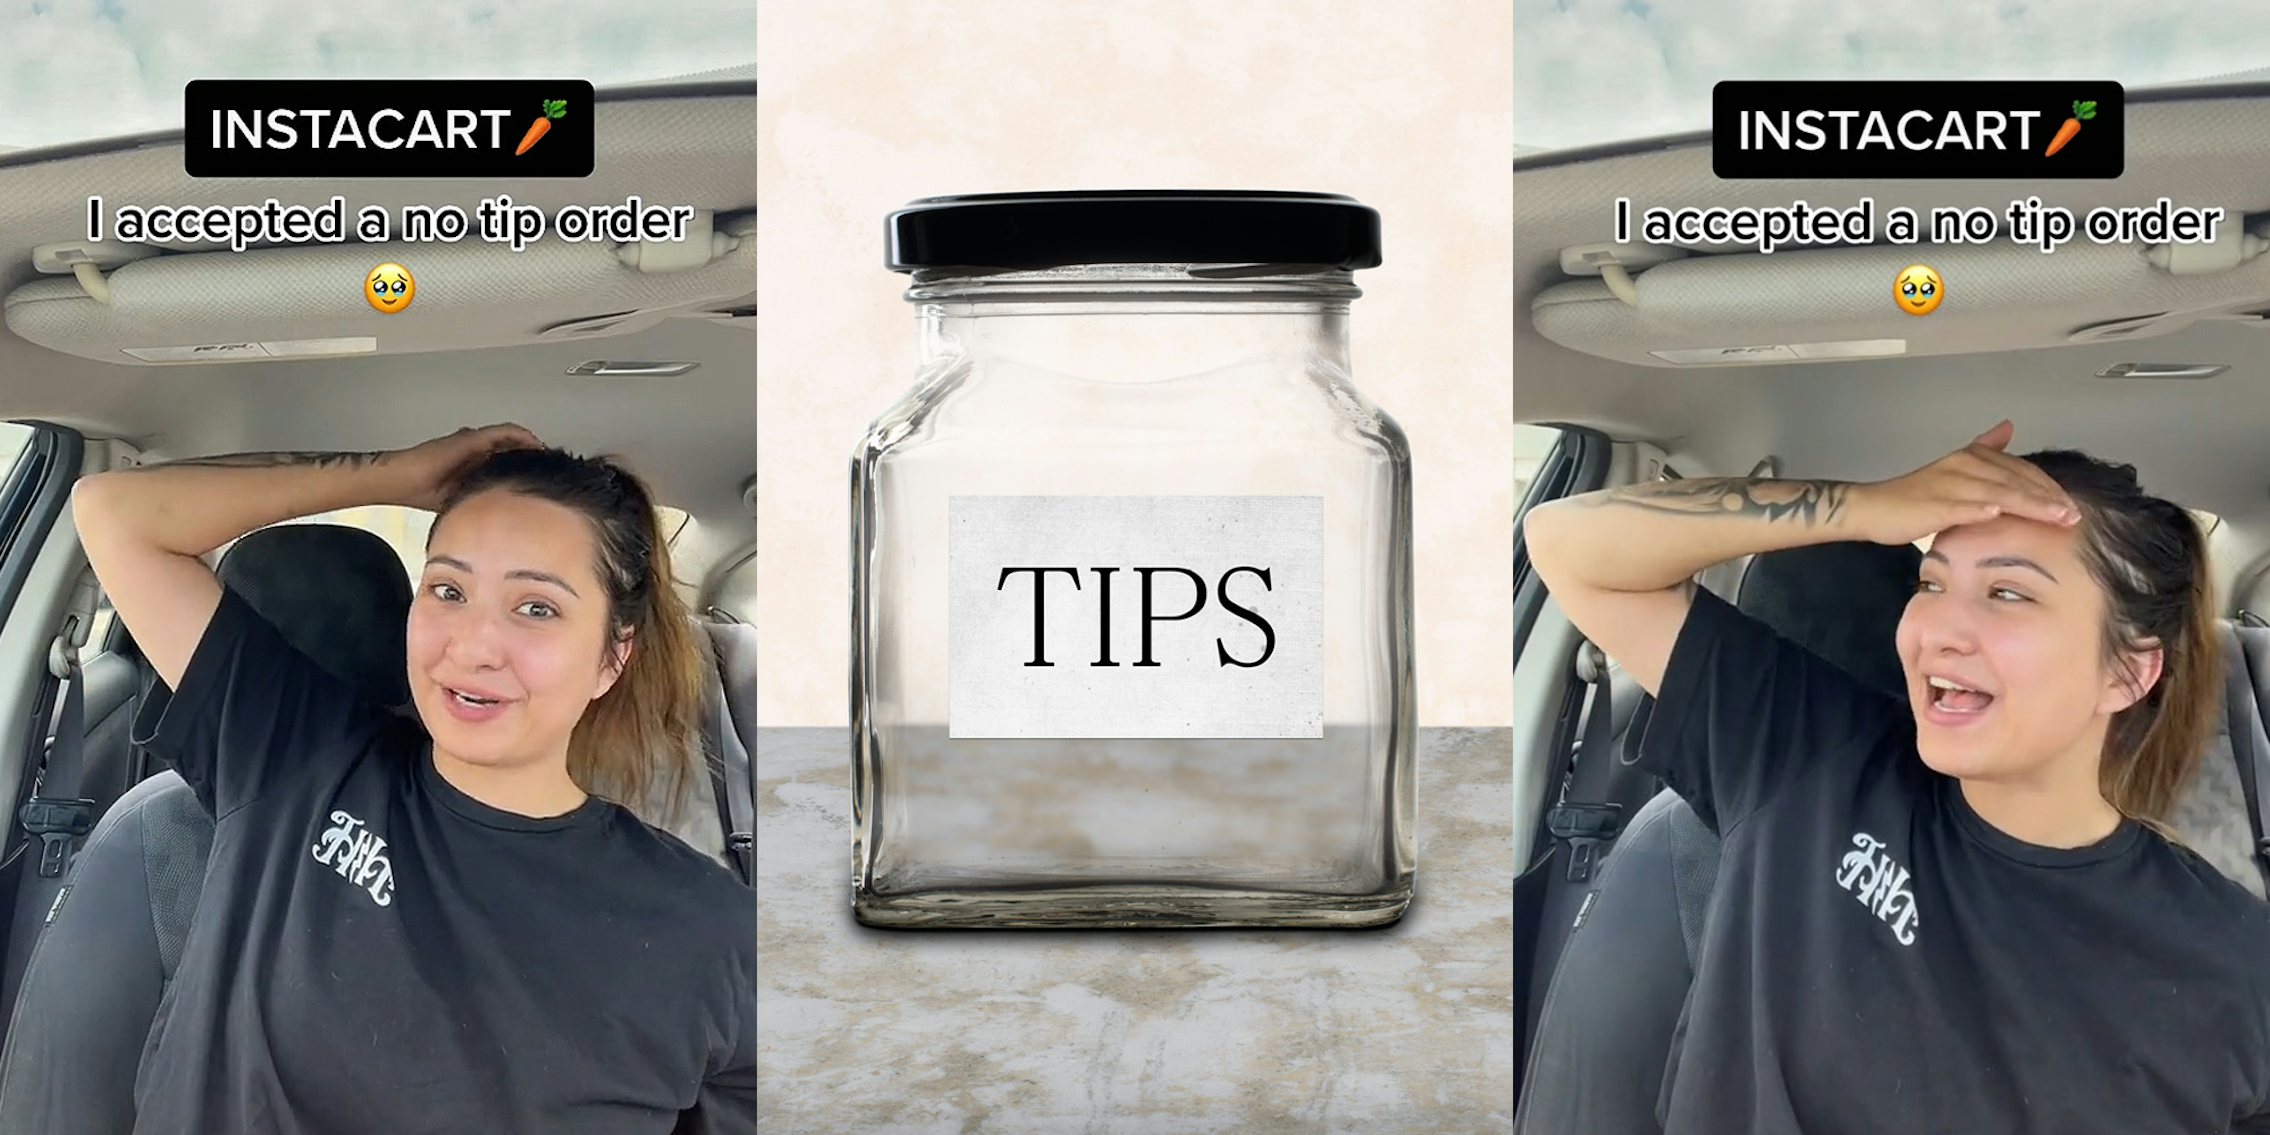 woman arm on head speaking in car caption 'INSTACART I accepted a no tip order' (l) empty tip jar on grey counter with cream background (c) woman hand on forehead speaking caption 'INSTACART I accepted a no tip order' (r)